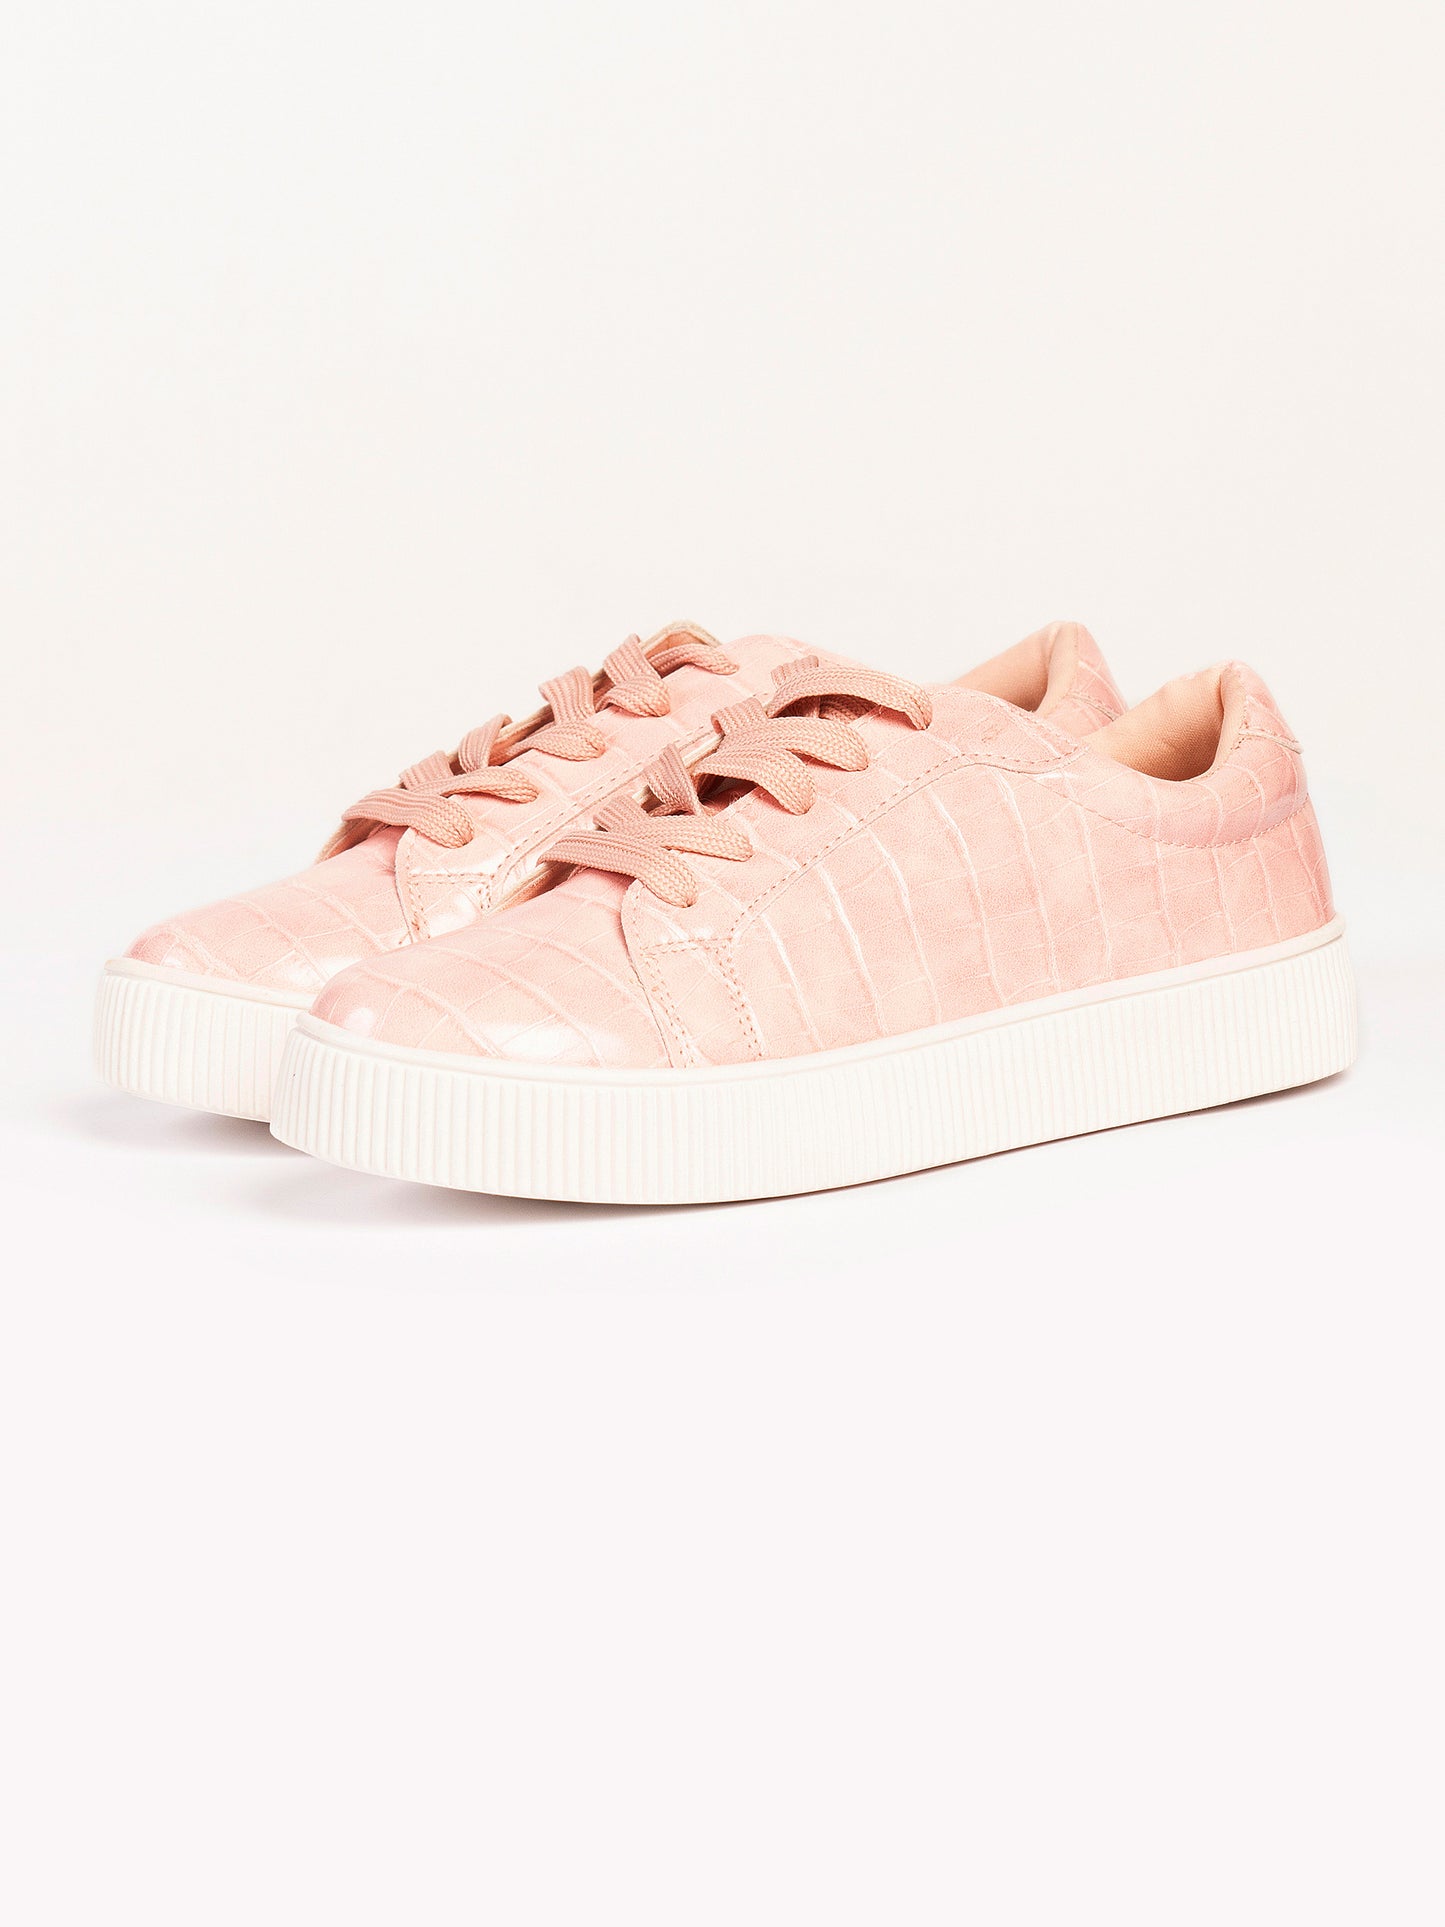 Glossy Textured Sneakers